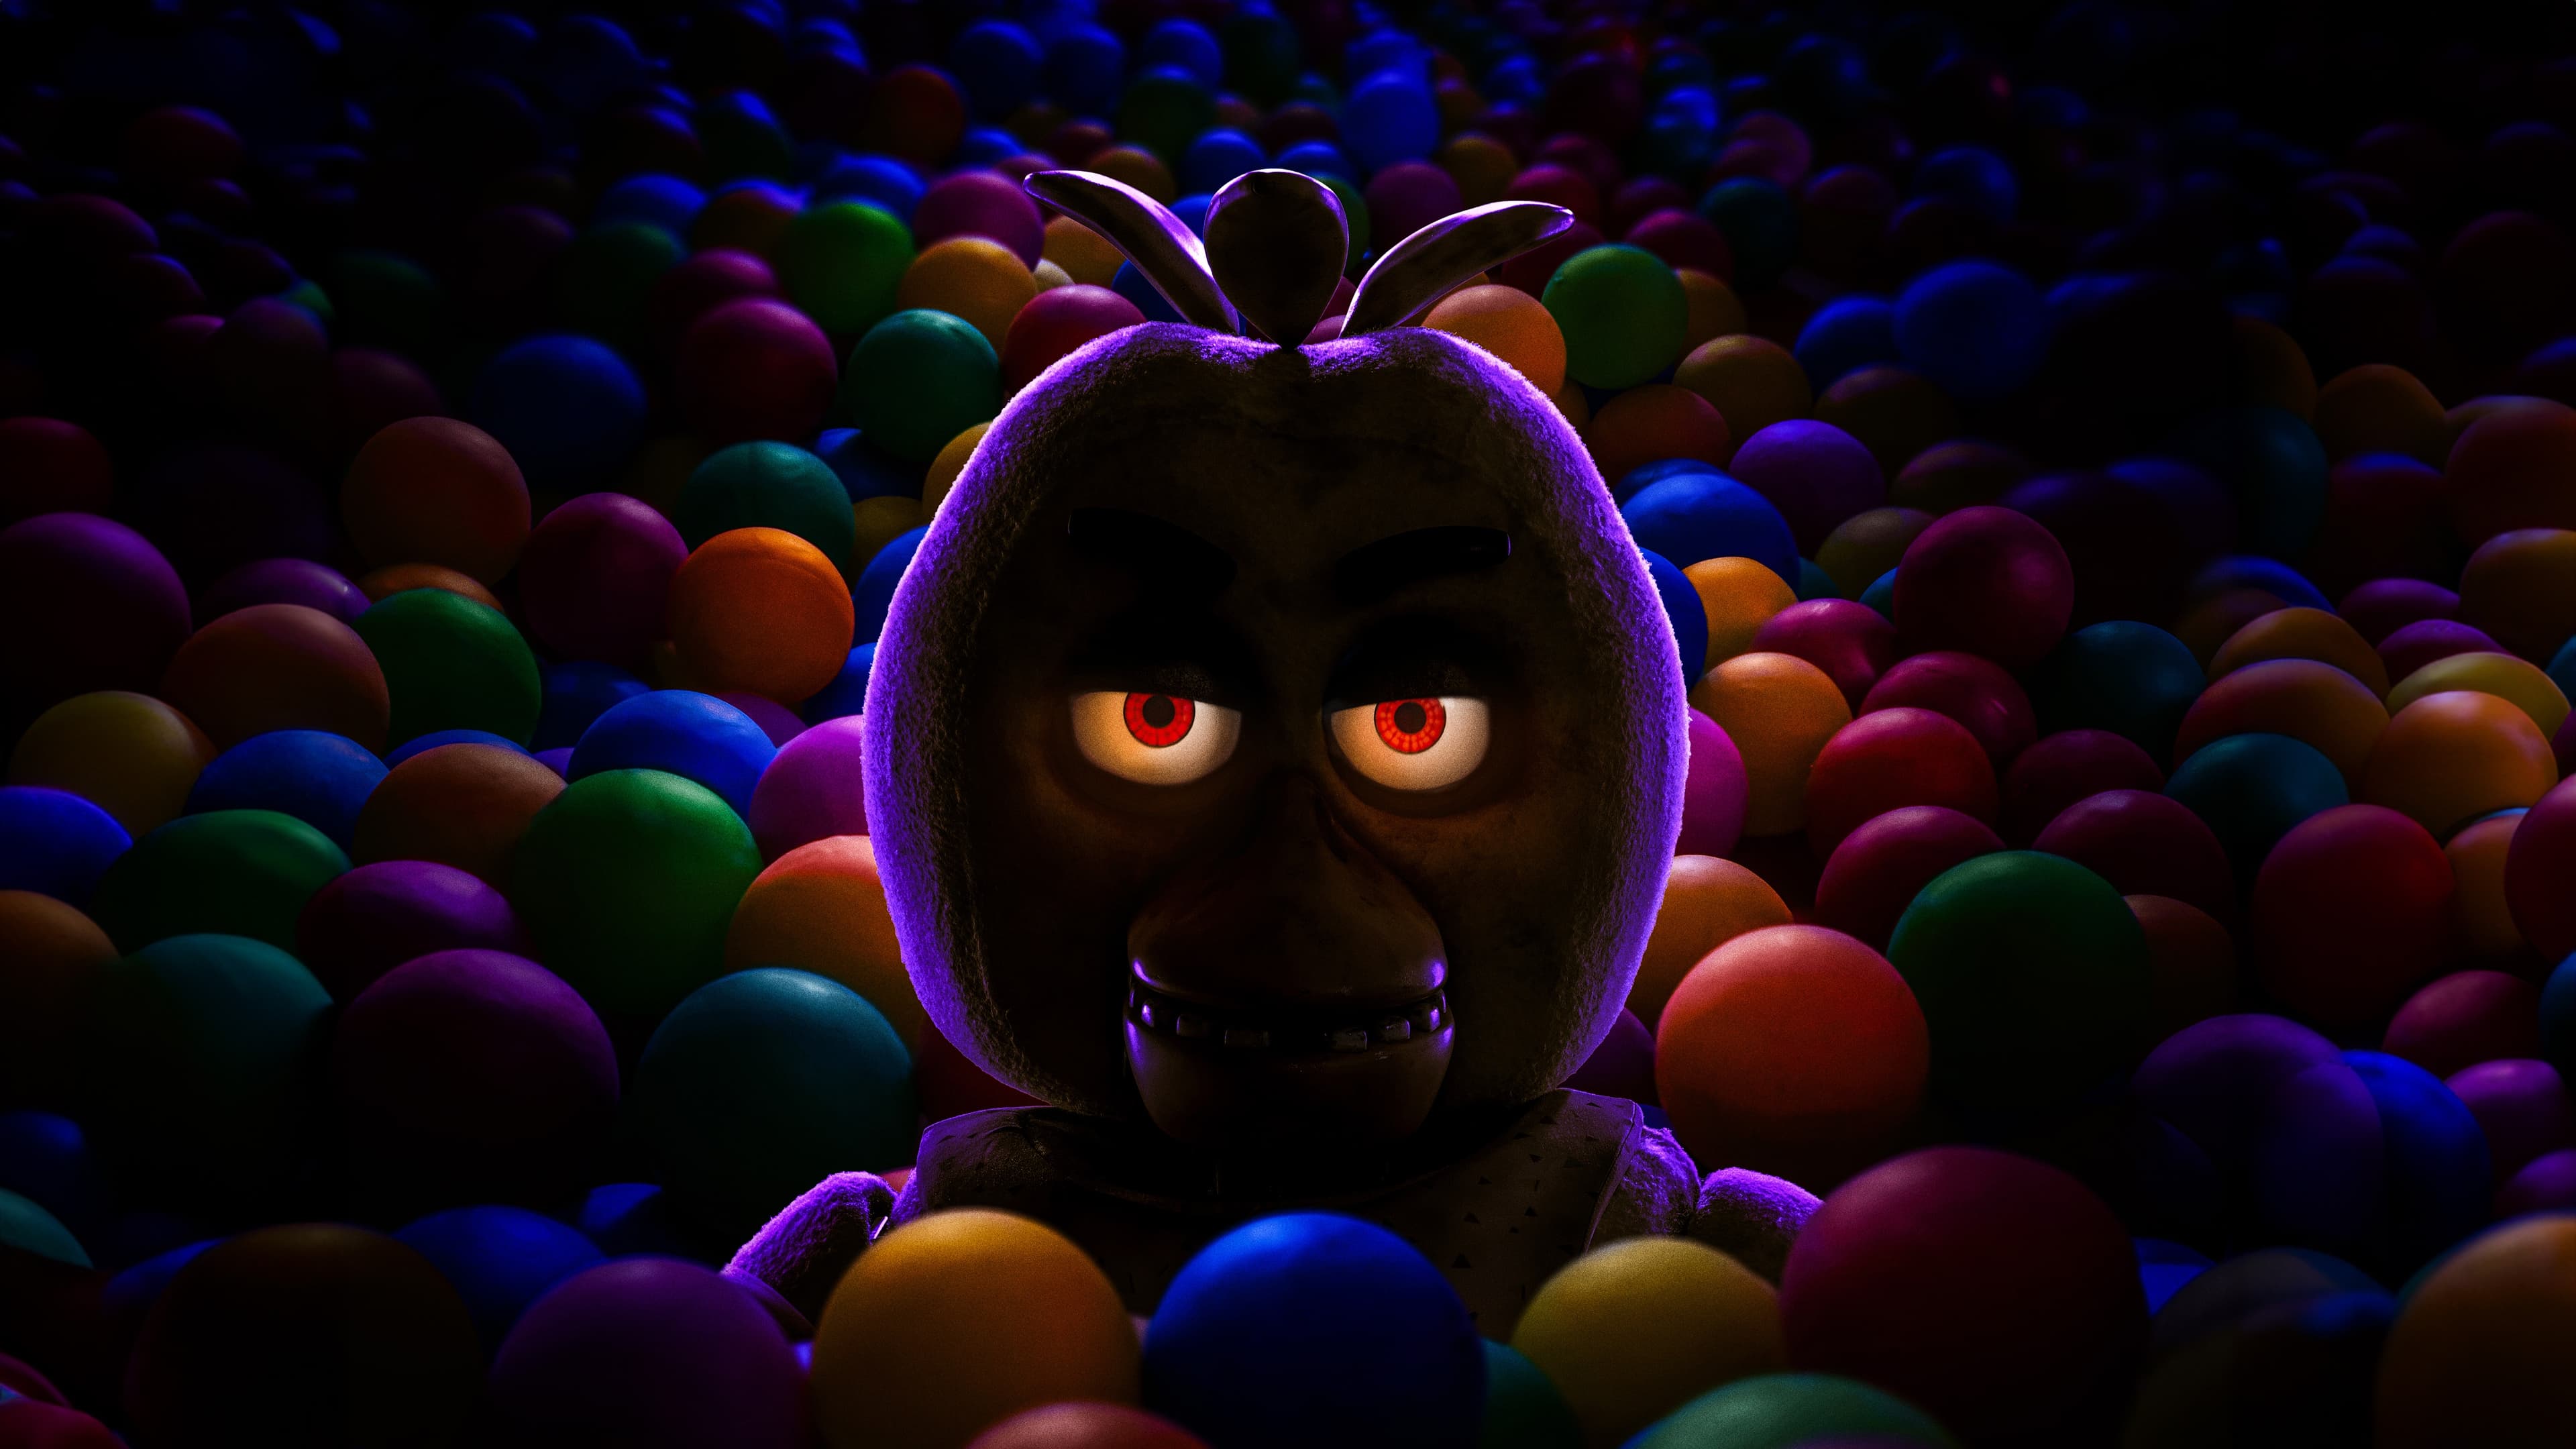 Five Nights at Freddy's (2023)